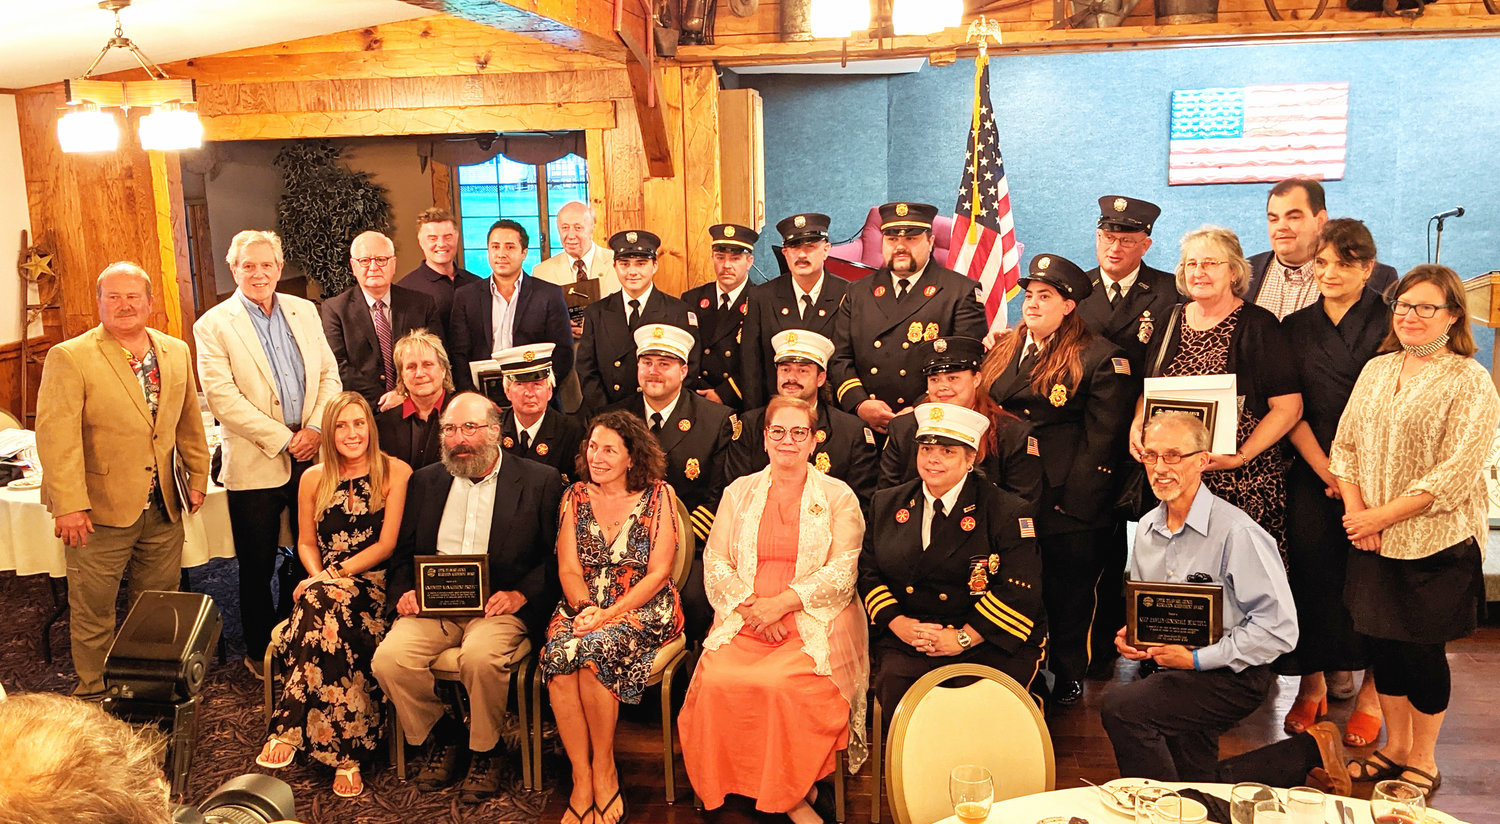 The 2021 Upper Delaware Council Honorees are as follows: Seated first row (left to right) are Richelle Dufton, Steve Schwartz, Sherri Resti Thomas, Bonnie Sheard, Sparrowbush Engine Co. (SECO) 2nd Assistant Chief Danielle Glynn, Mike Coppola. Seated 2nd row (left to right) are Rocky Pinciotti, Deputy Chief Jack Flynn, 2nd Assistant Chief Carl L. Van Horn, Chief Jeremy Swingle, Firefighter Kayla Degraw (SECO). Standing (left to right) are Highland Town Supervisor Jeff Haas, Andy Boyar, John Conway (The Delaware Company), Tim Bruno (WJFF Radio Catskill), Steve Melendez (The Delaware Company), Larry H. Richardson, Firefighter Scott Glynn, 2nd Lt. Kevin Fisher, Fire Police Captain Marty Reiser, Captain Michael Reiser, Firefighter Heather Van Horn, Dive Master Chris Morgan (SECO); Delaware Town Clerk Tess McBeath, Sullivan County Legislature Chairperson Robert Doherty, Sullivan County Planning Commissioner Freda Eisenberg, and Sullivan County Senior Planner Heather Jacksy.